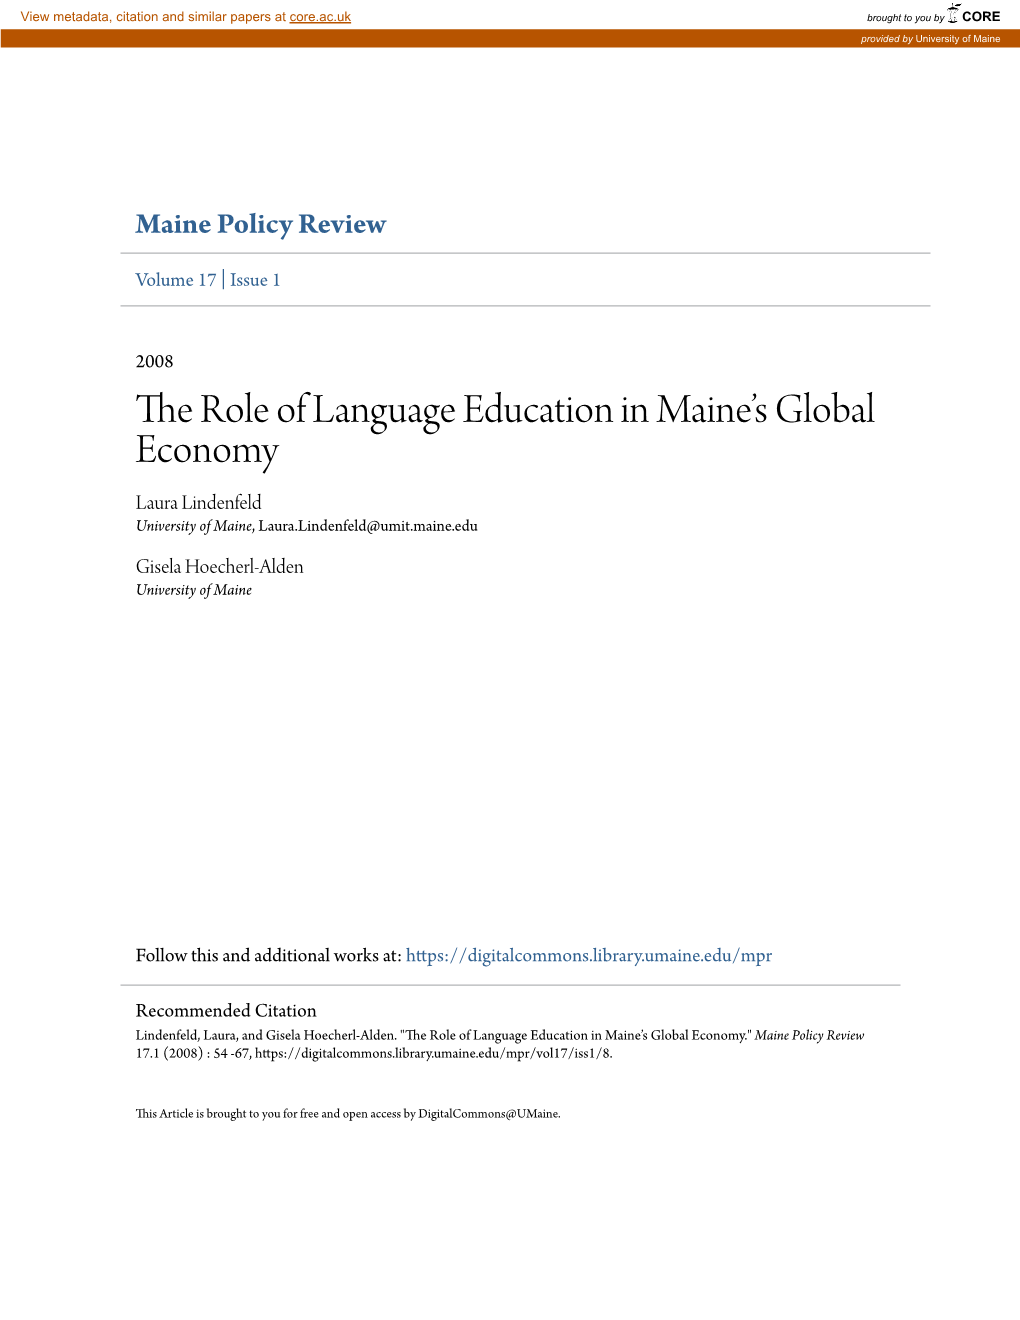 The Role of Language Education in Maine's Global Economy